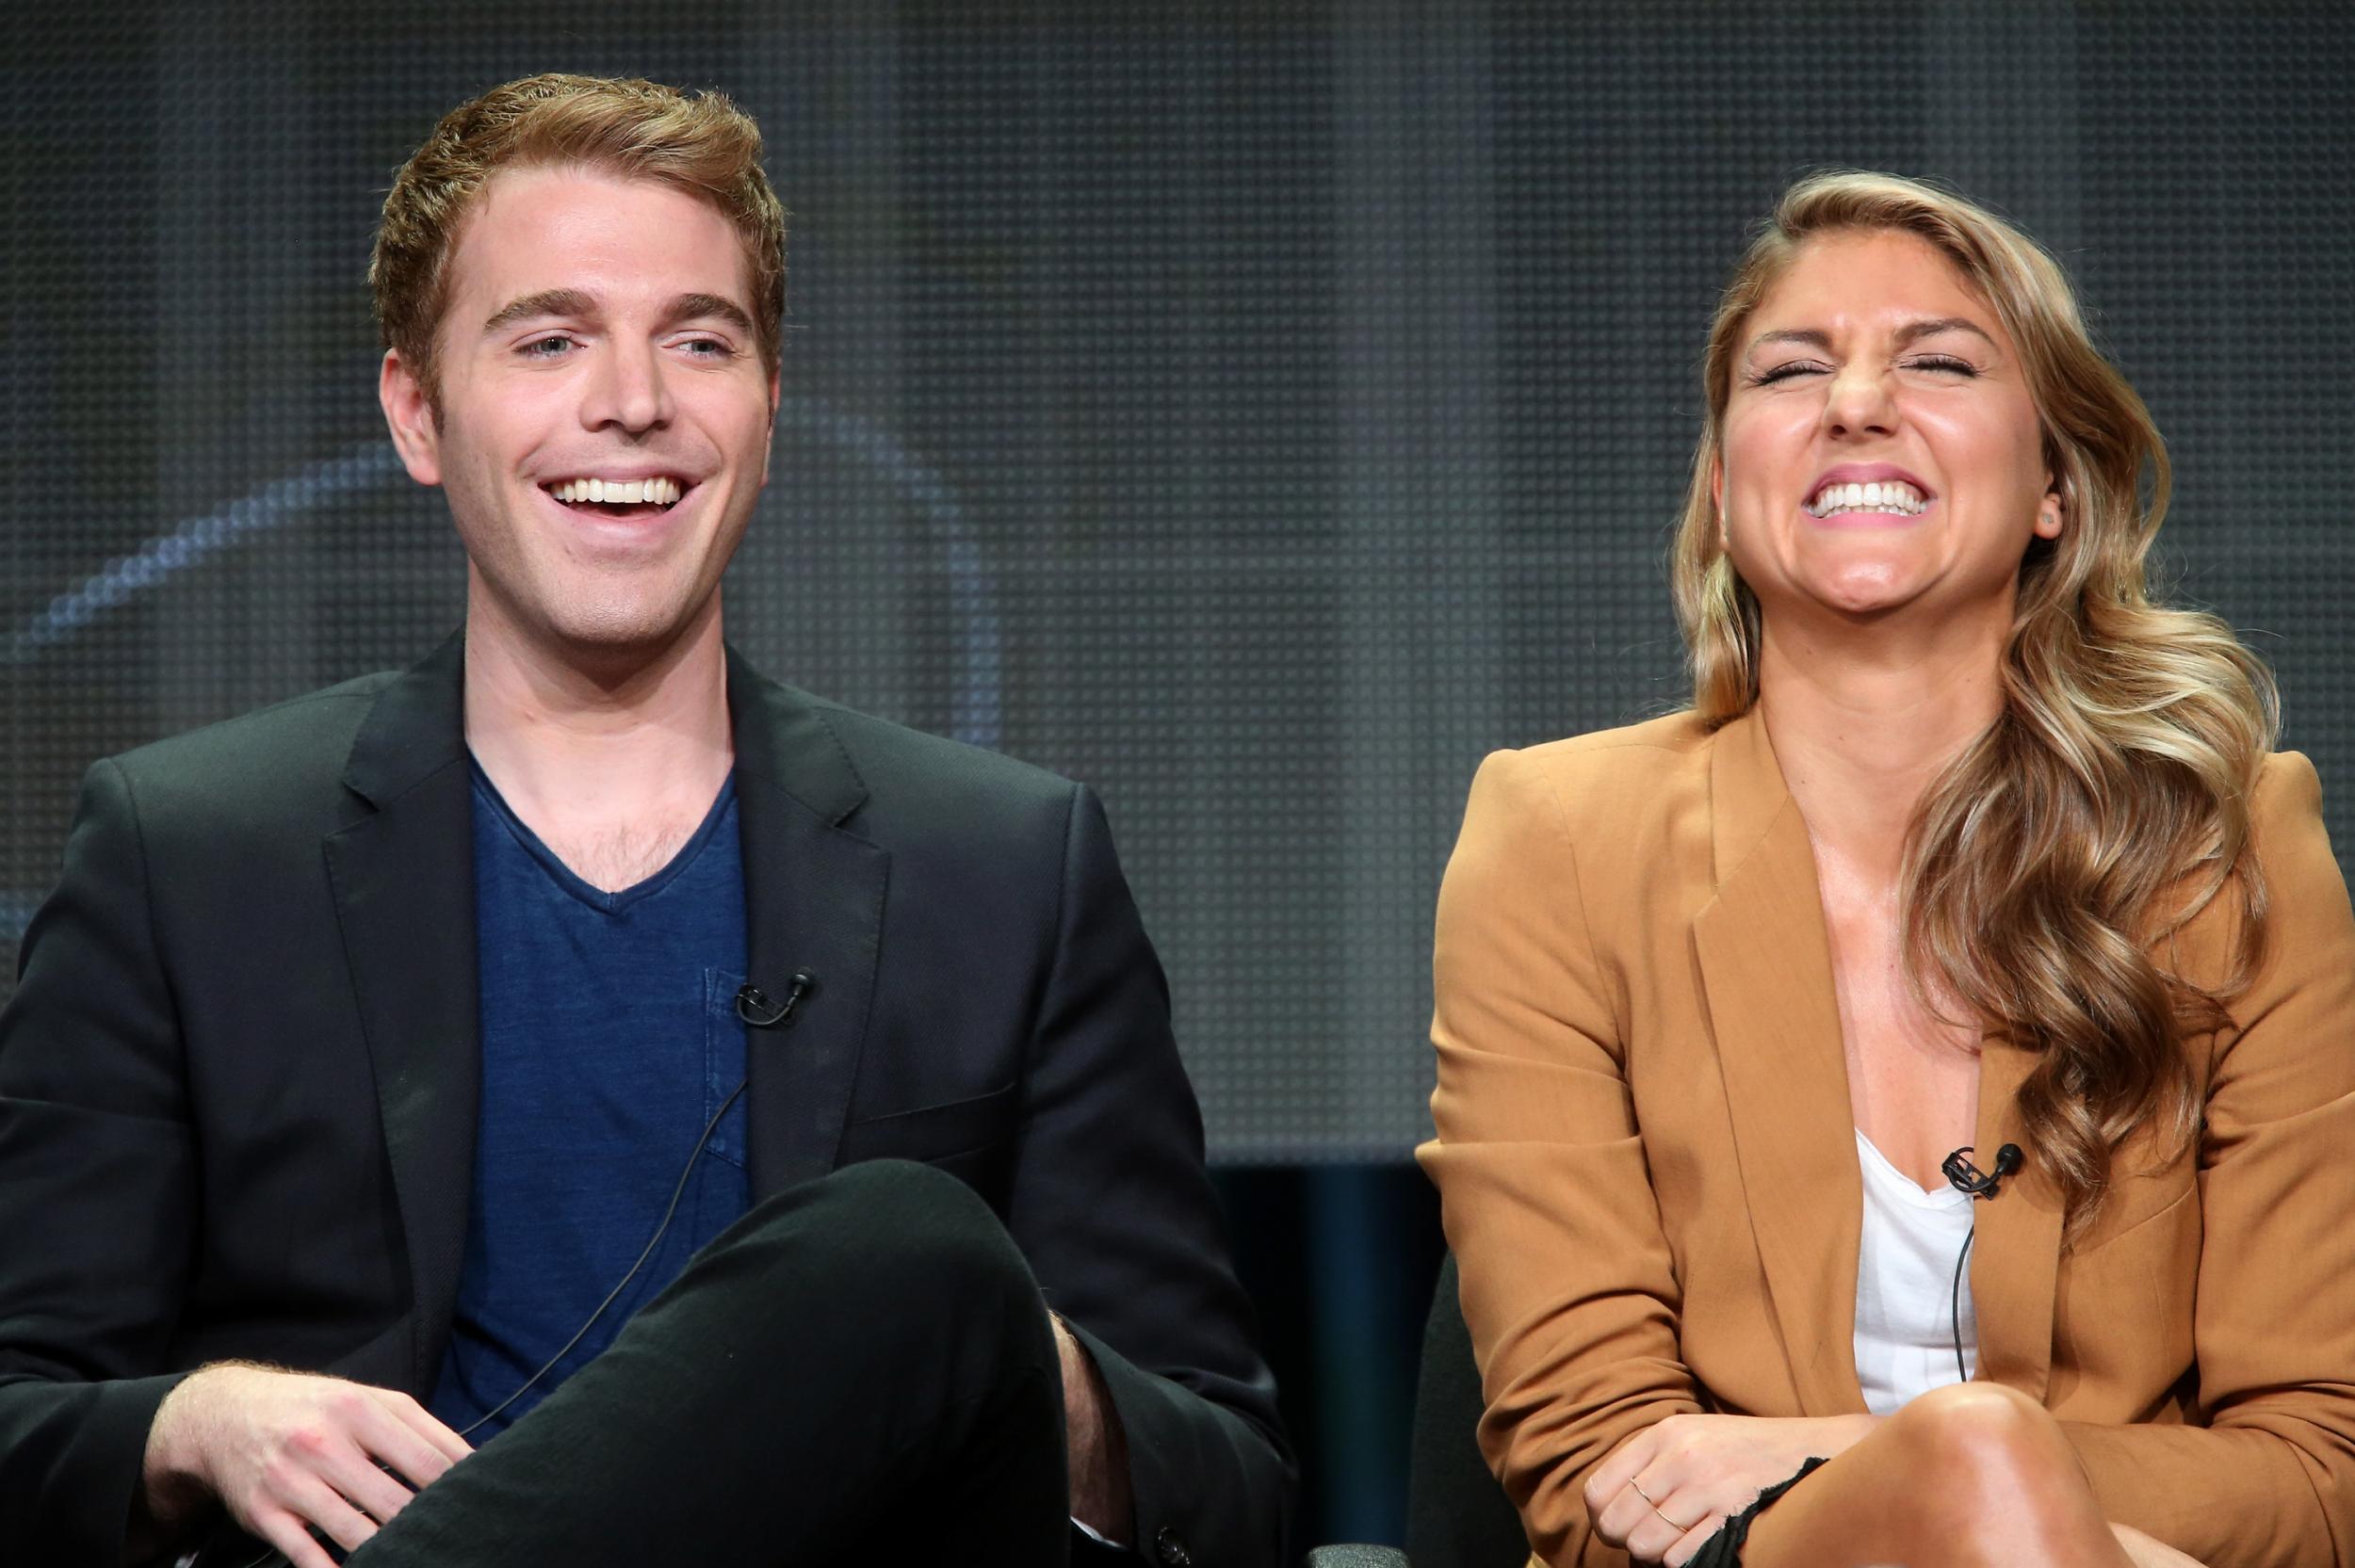 Directors Shane Dawson and Anna Martemucci speak onstage at the 'The Chair' panel during the Starz portion of the 2014 Summer Television Critics Association